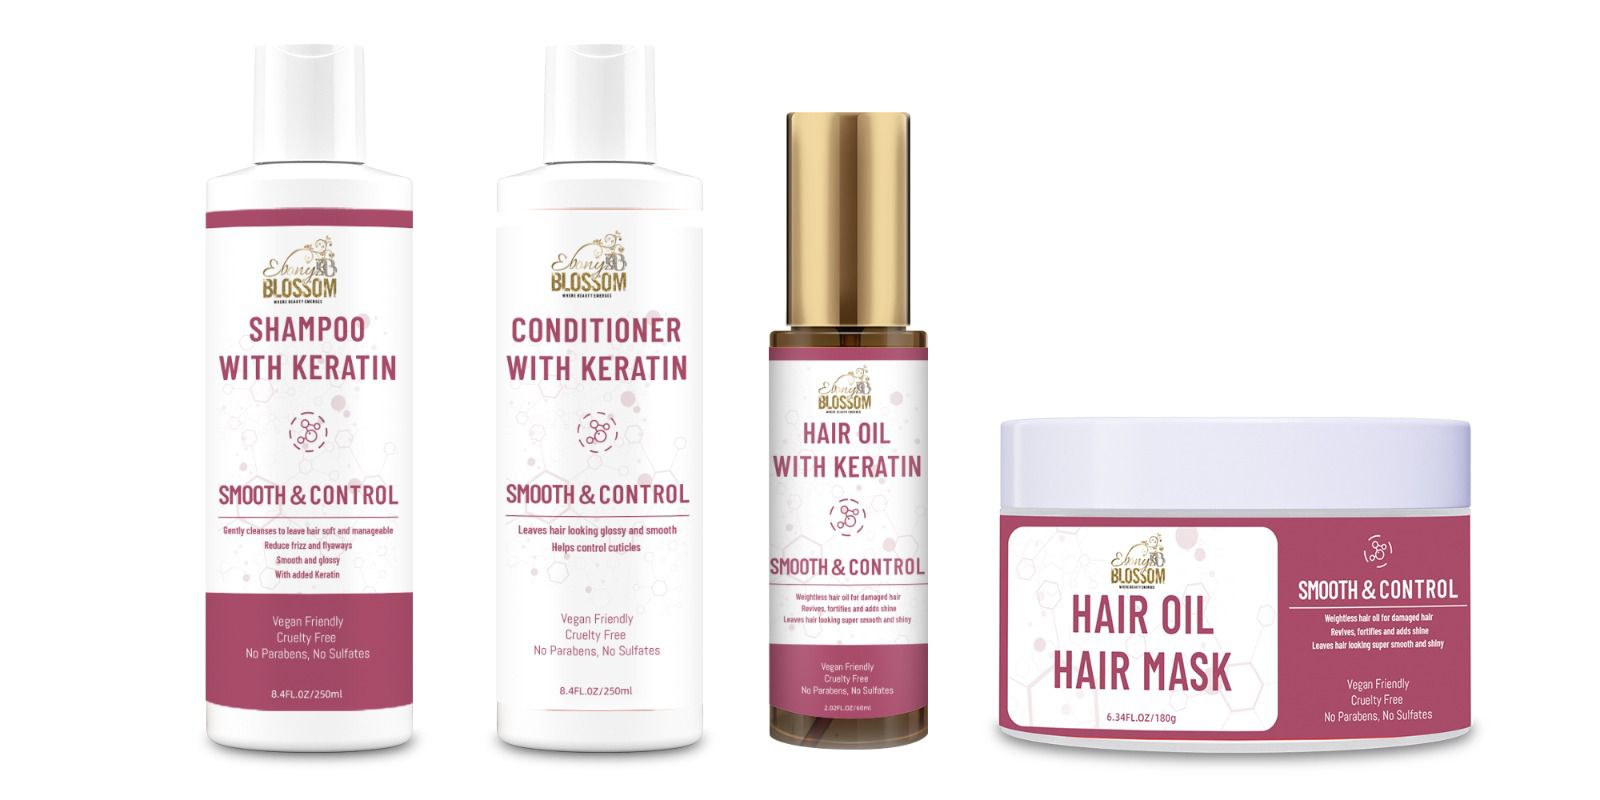 Smooth & Control with Keratin Hair Care Sets